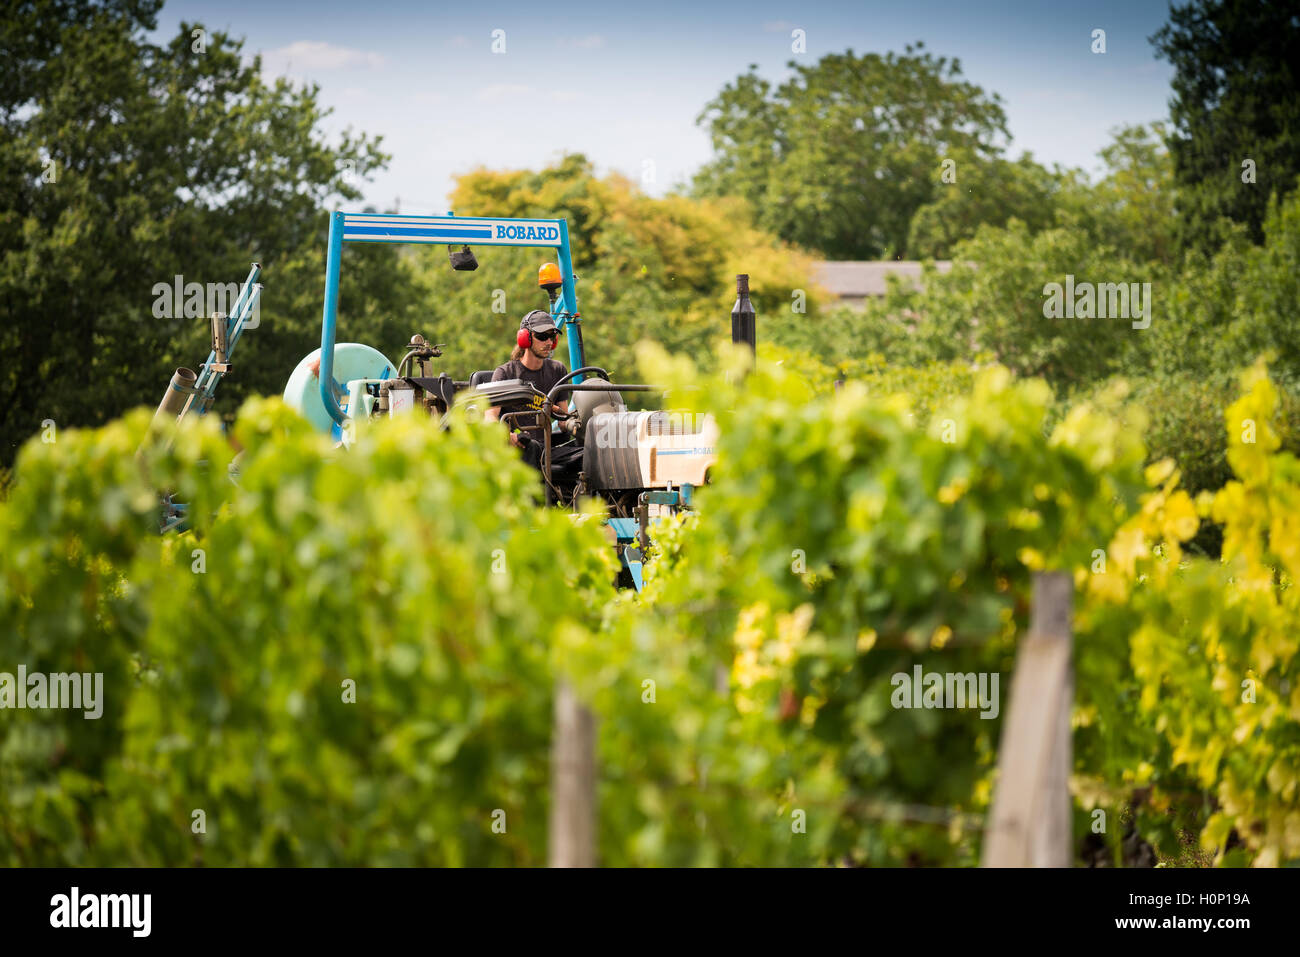 tractor at work during harvest in vineyard at St Emilion, Bordeaux wine region of France Stock Photo